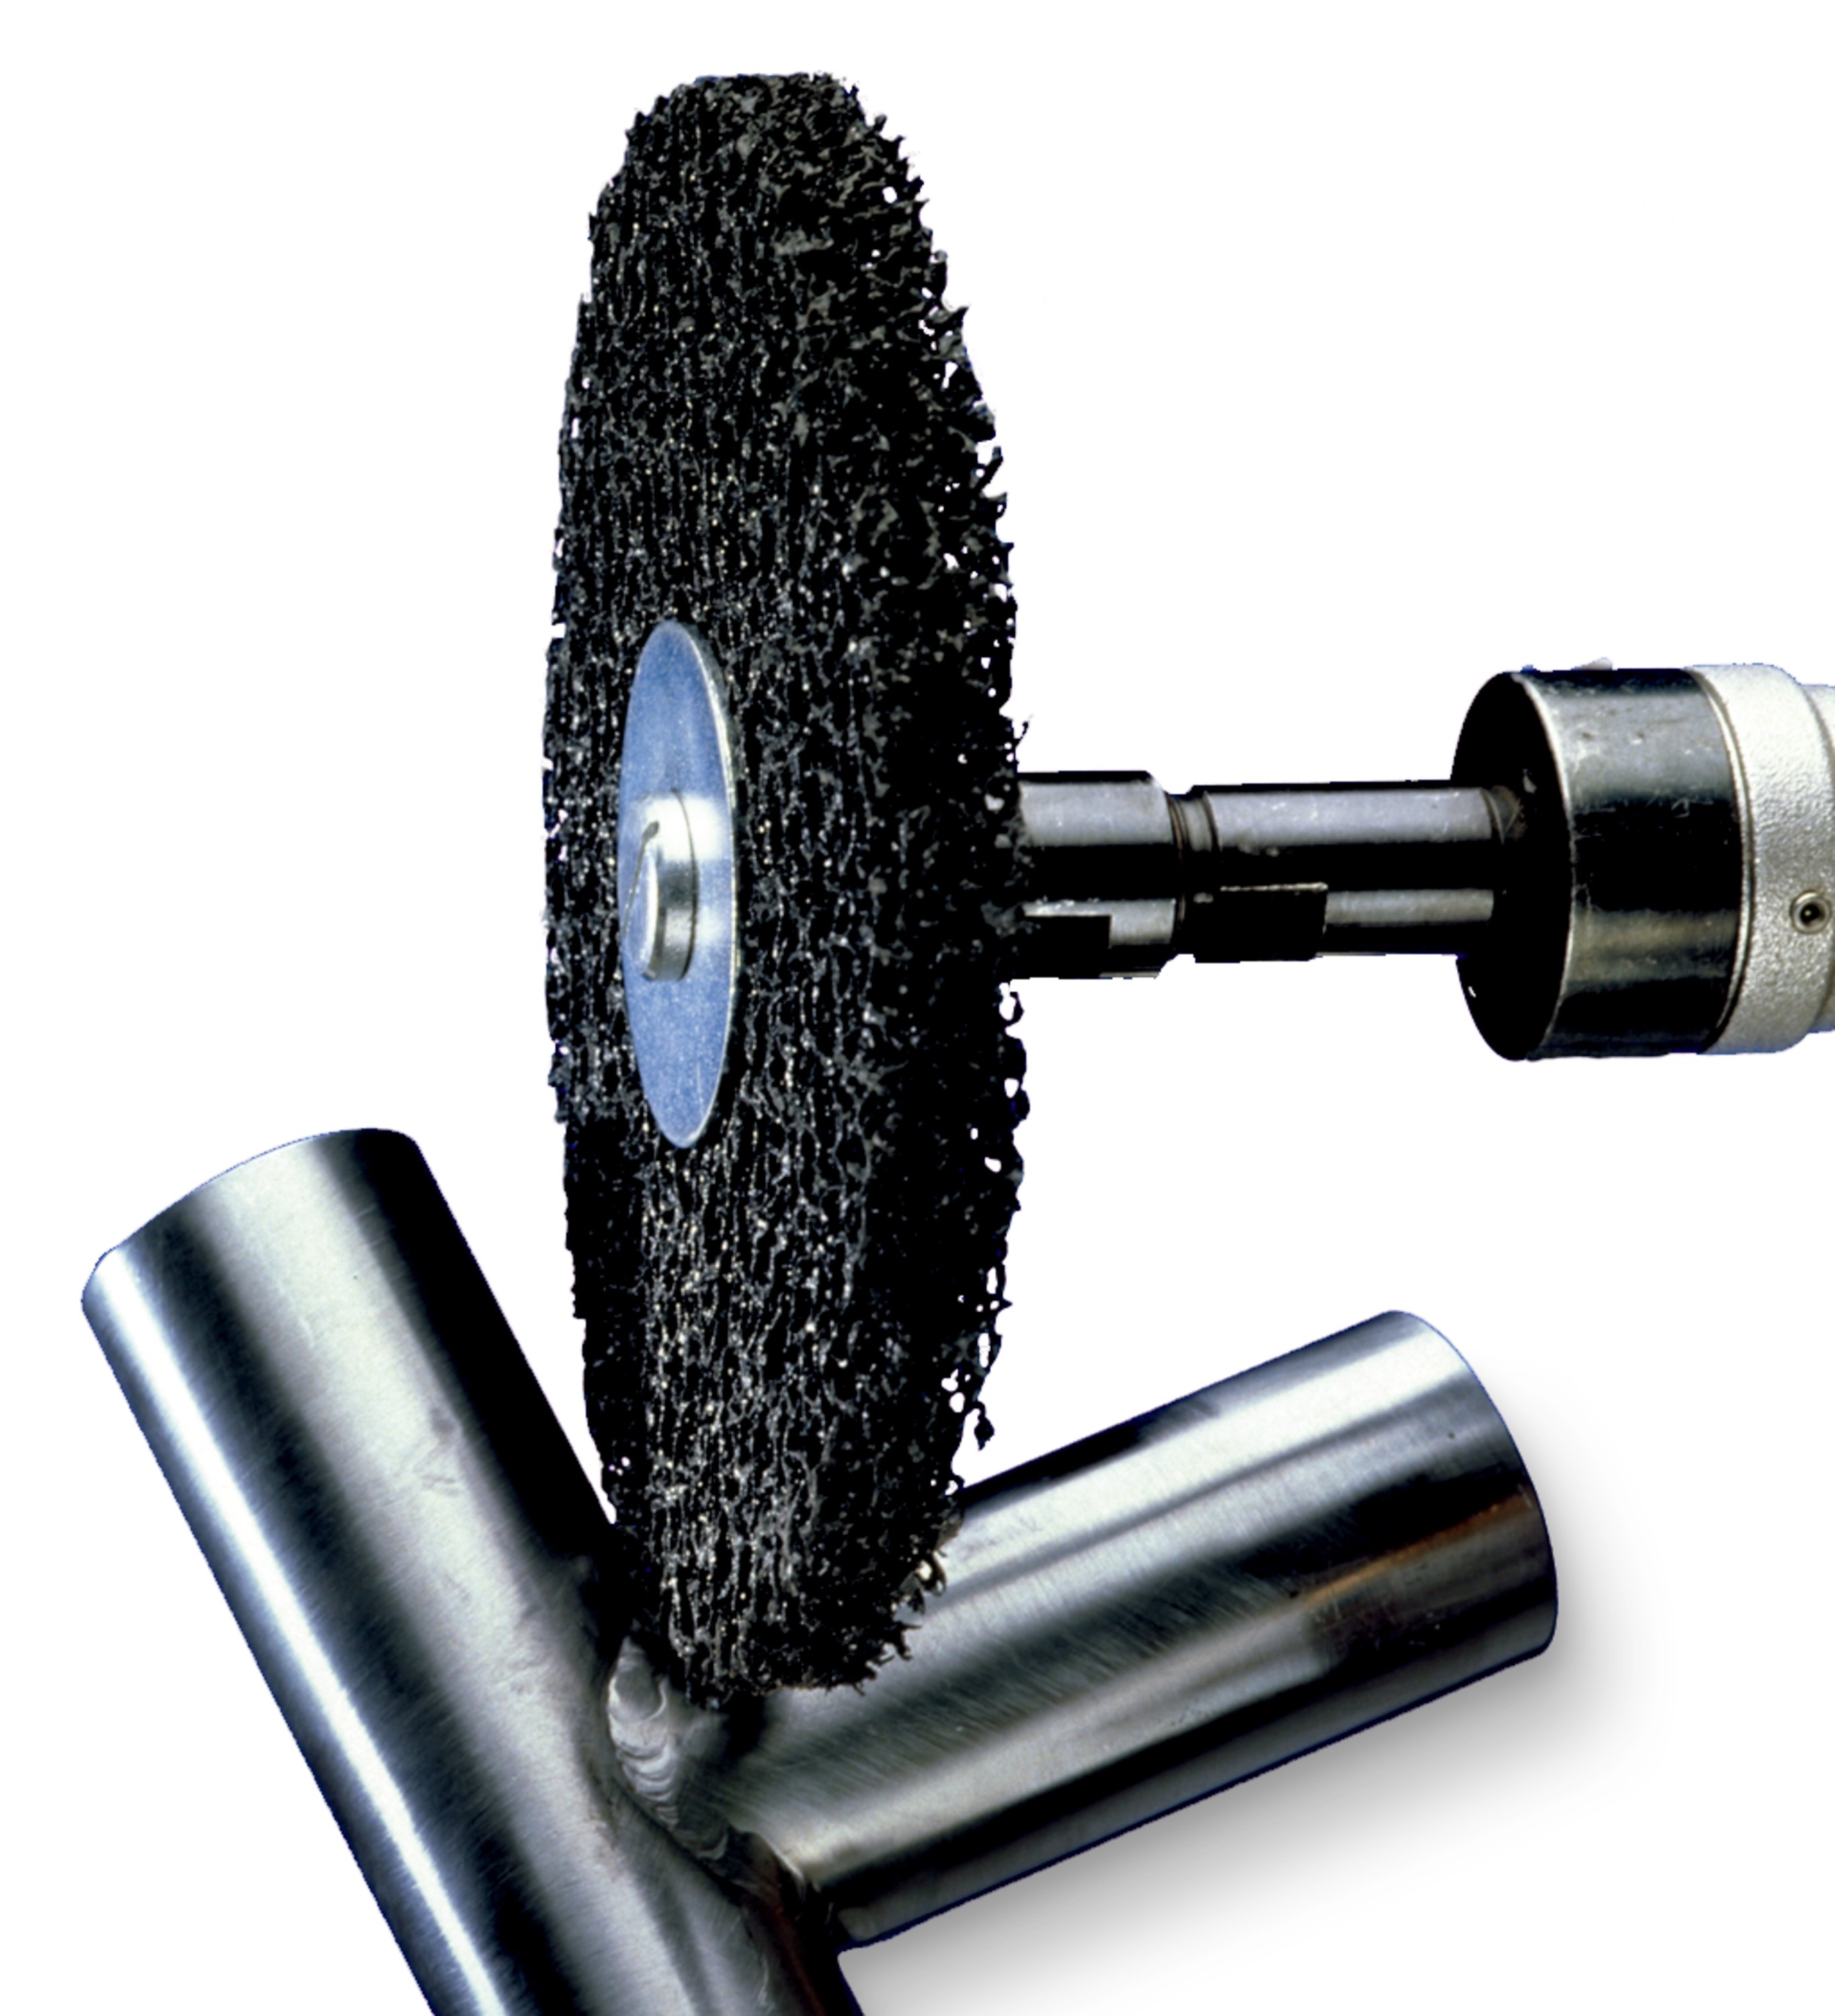 3M™ Wheel Mandrel enables effective disc to tool attachment for Scotch- Brite™ Clean and Strip Discs (sold separately)